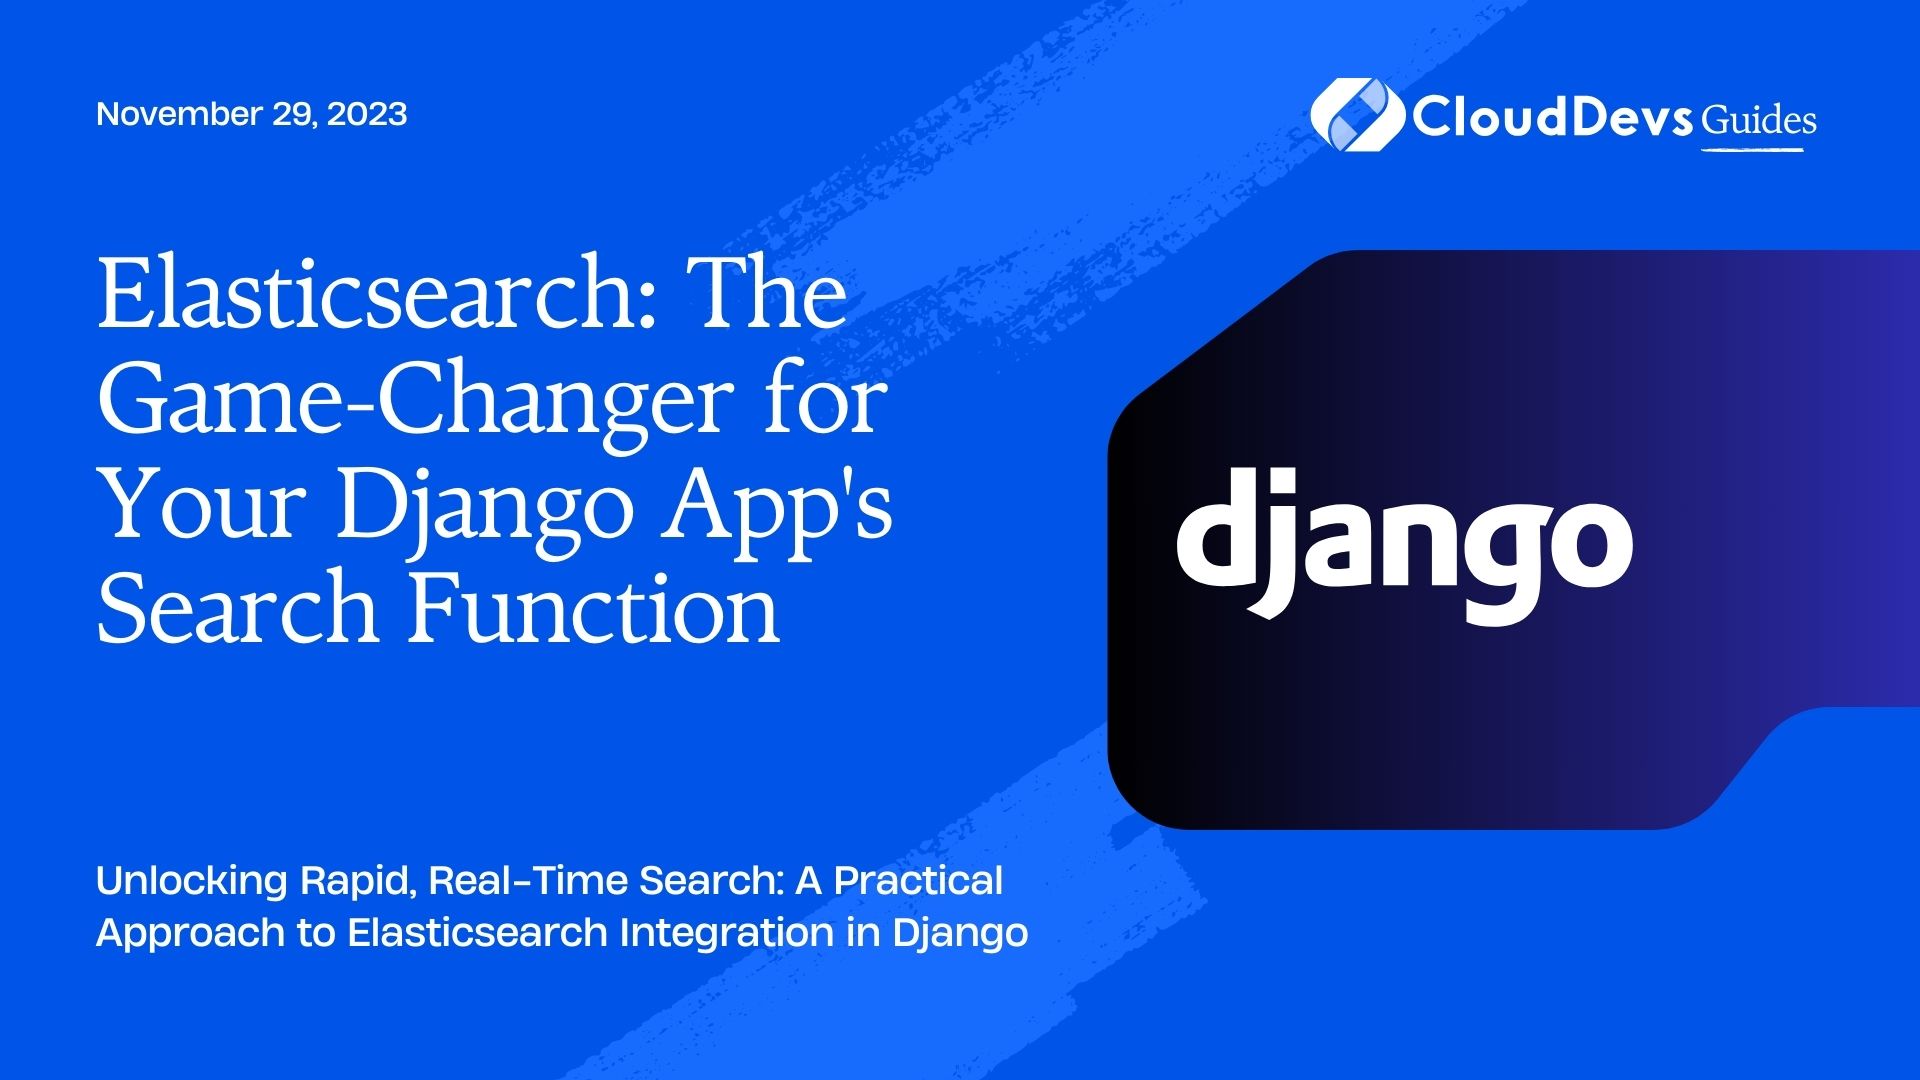 Elasticsearch: The Game-Changer for Your Django App's Search Function